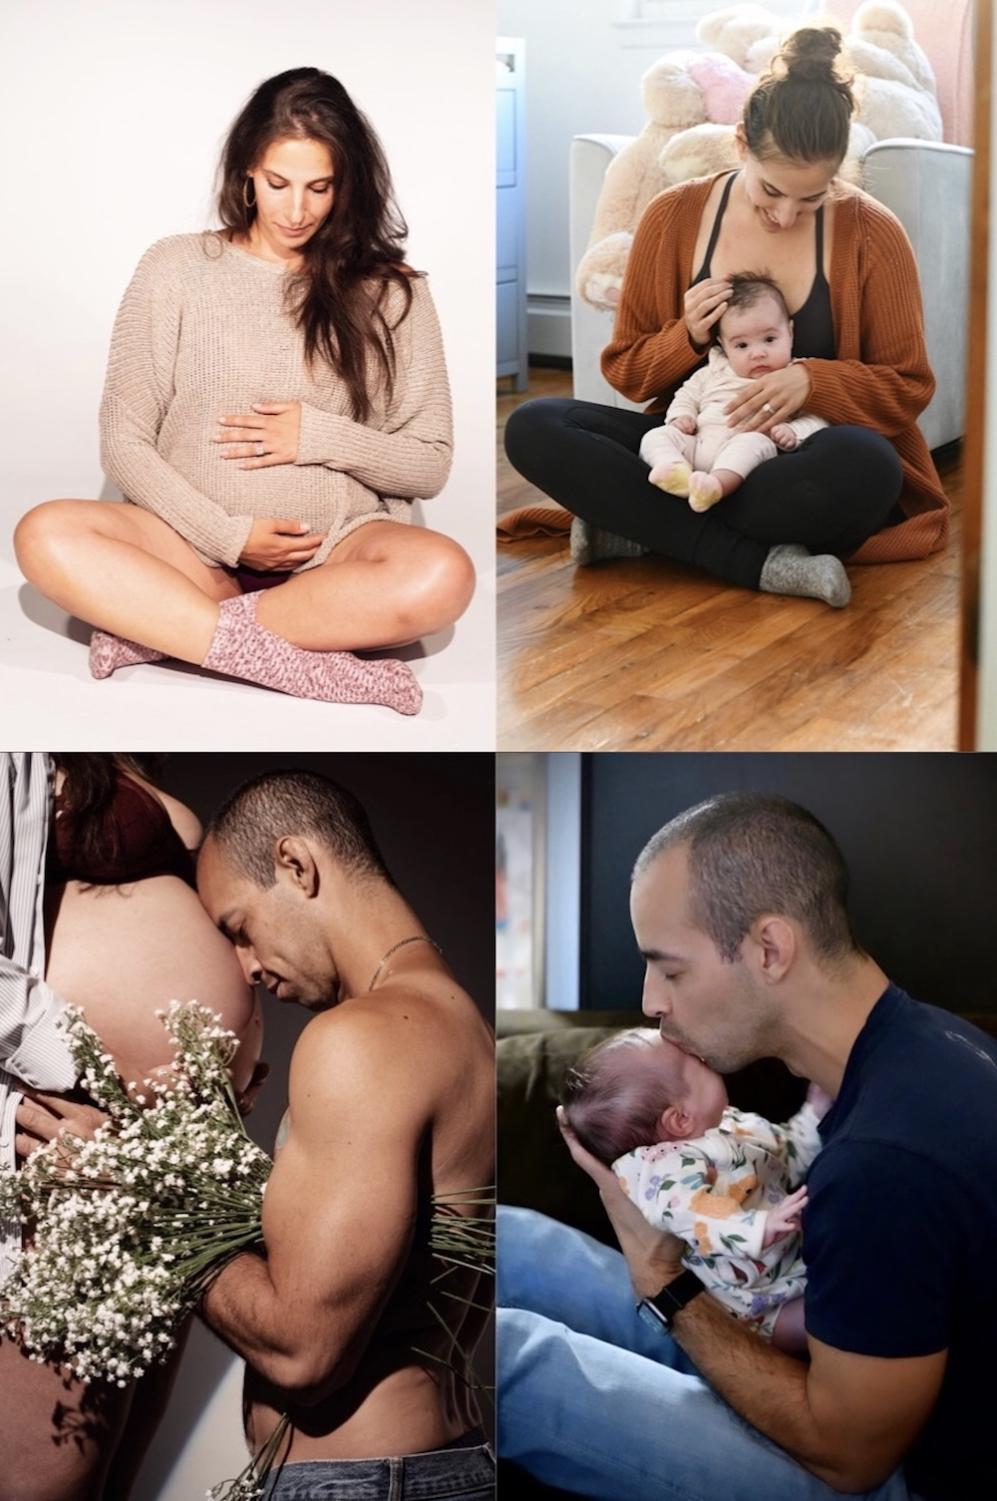 A collage of a woman and a man holding a baby before and after labor.